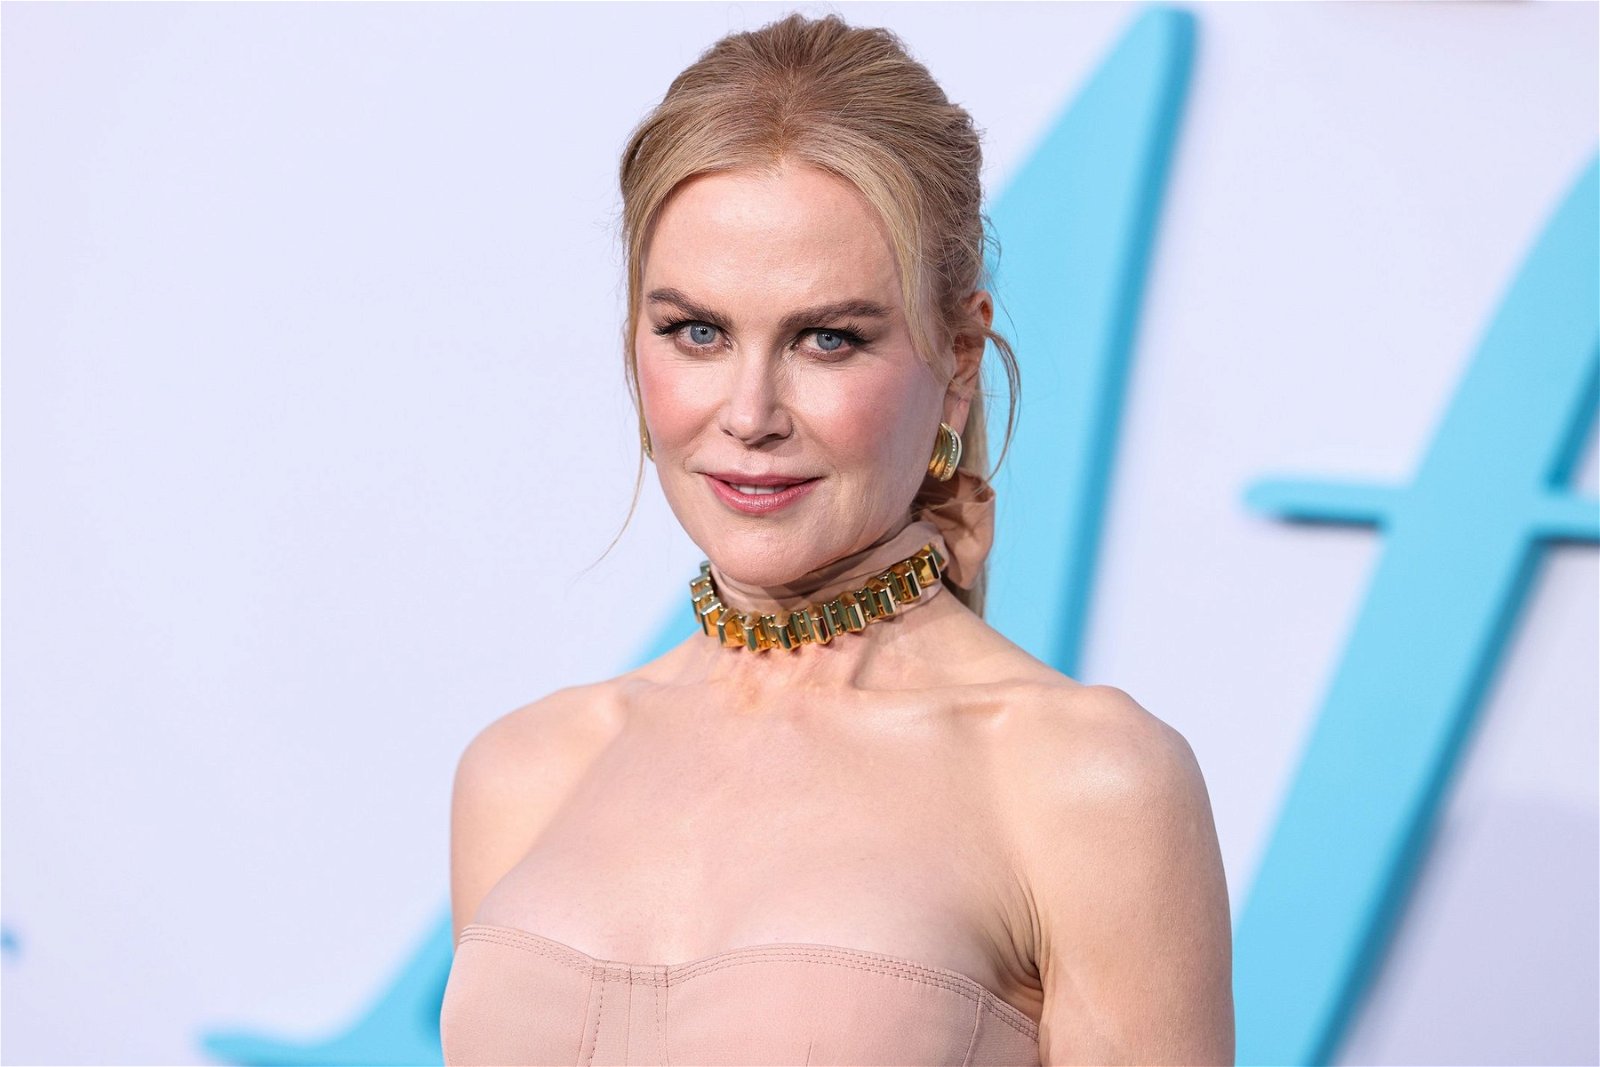 Nicole Kidman sent a message to Hungarians that we will never forget her